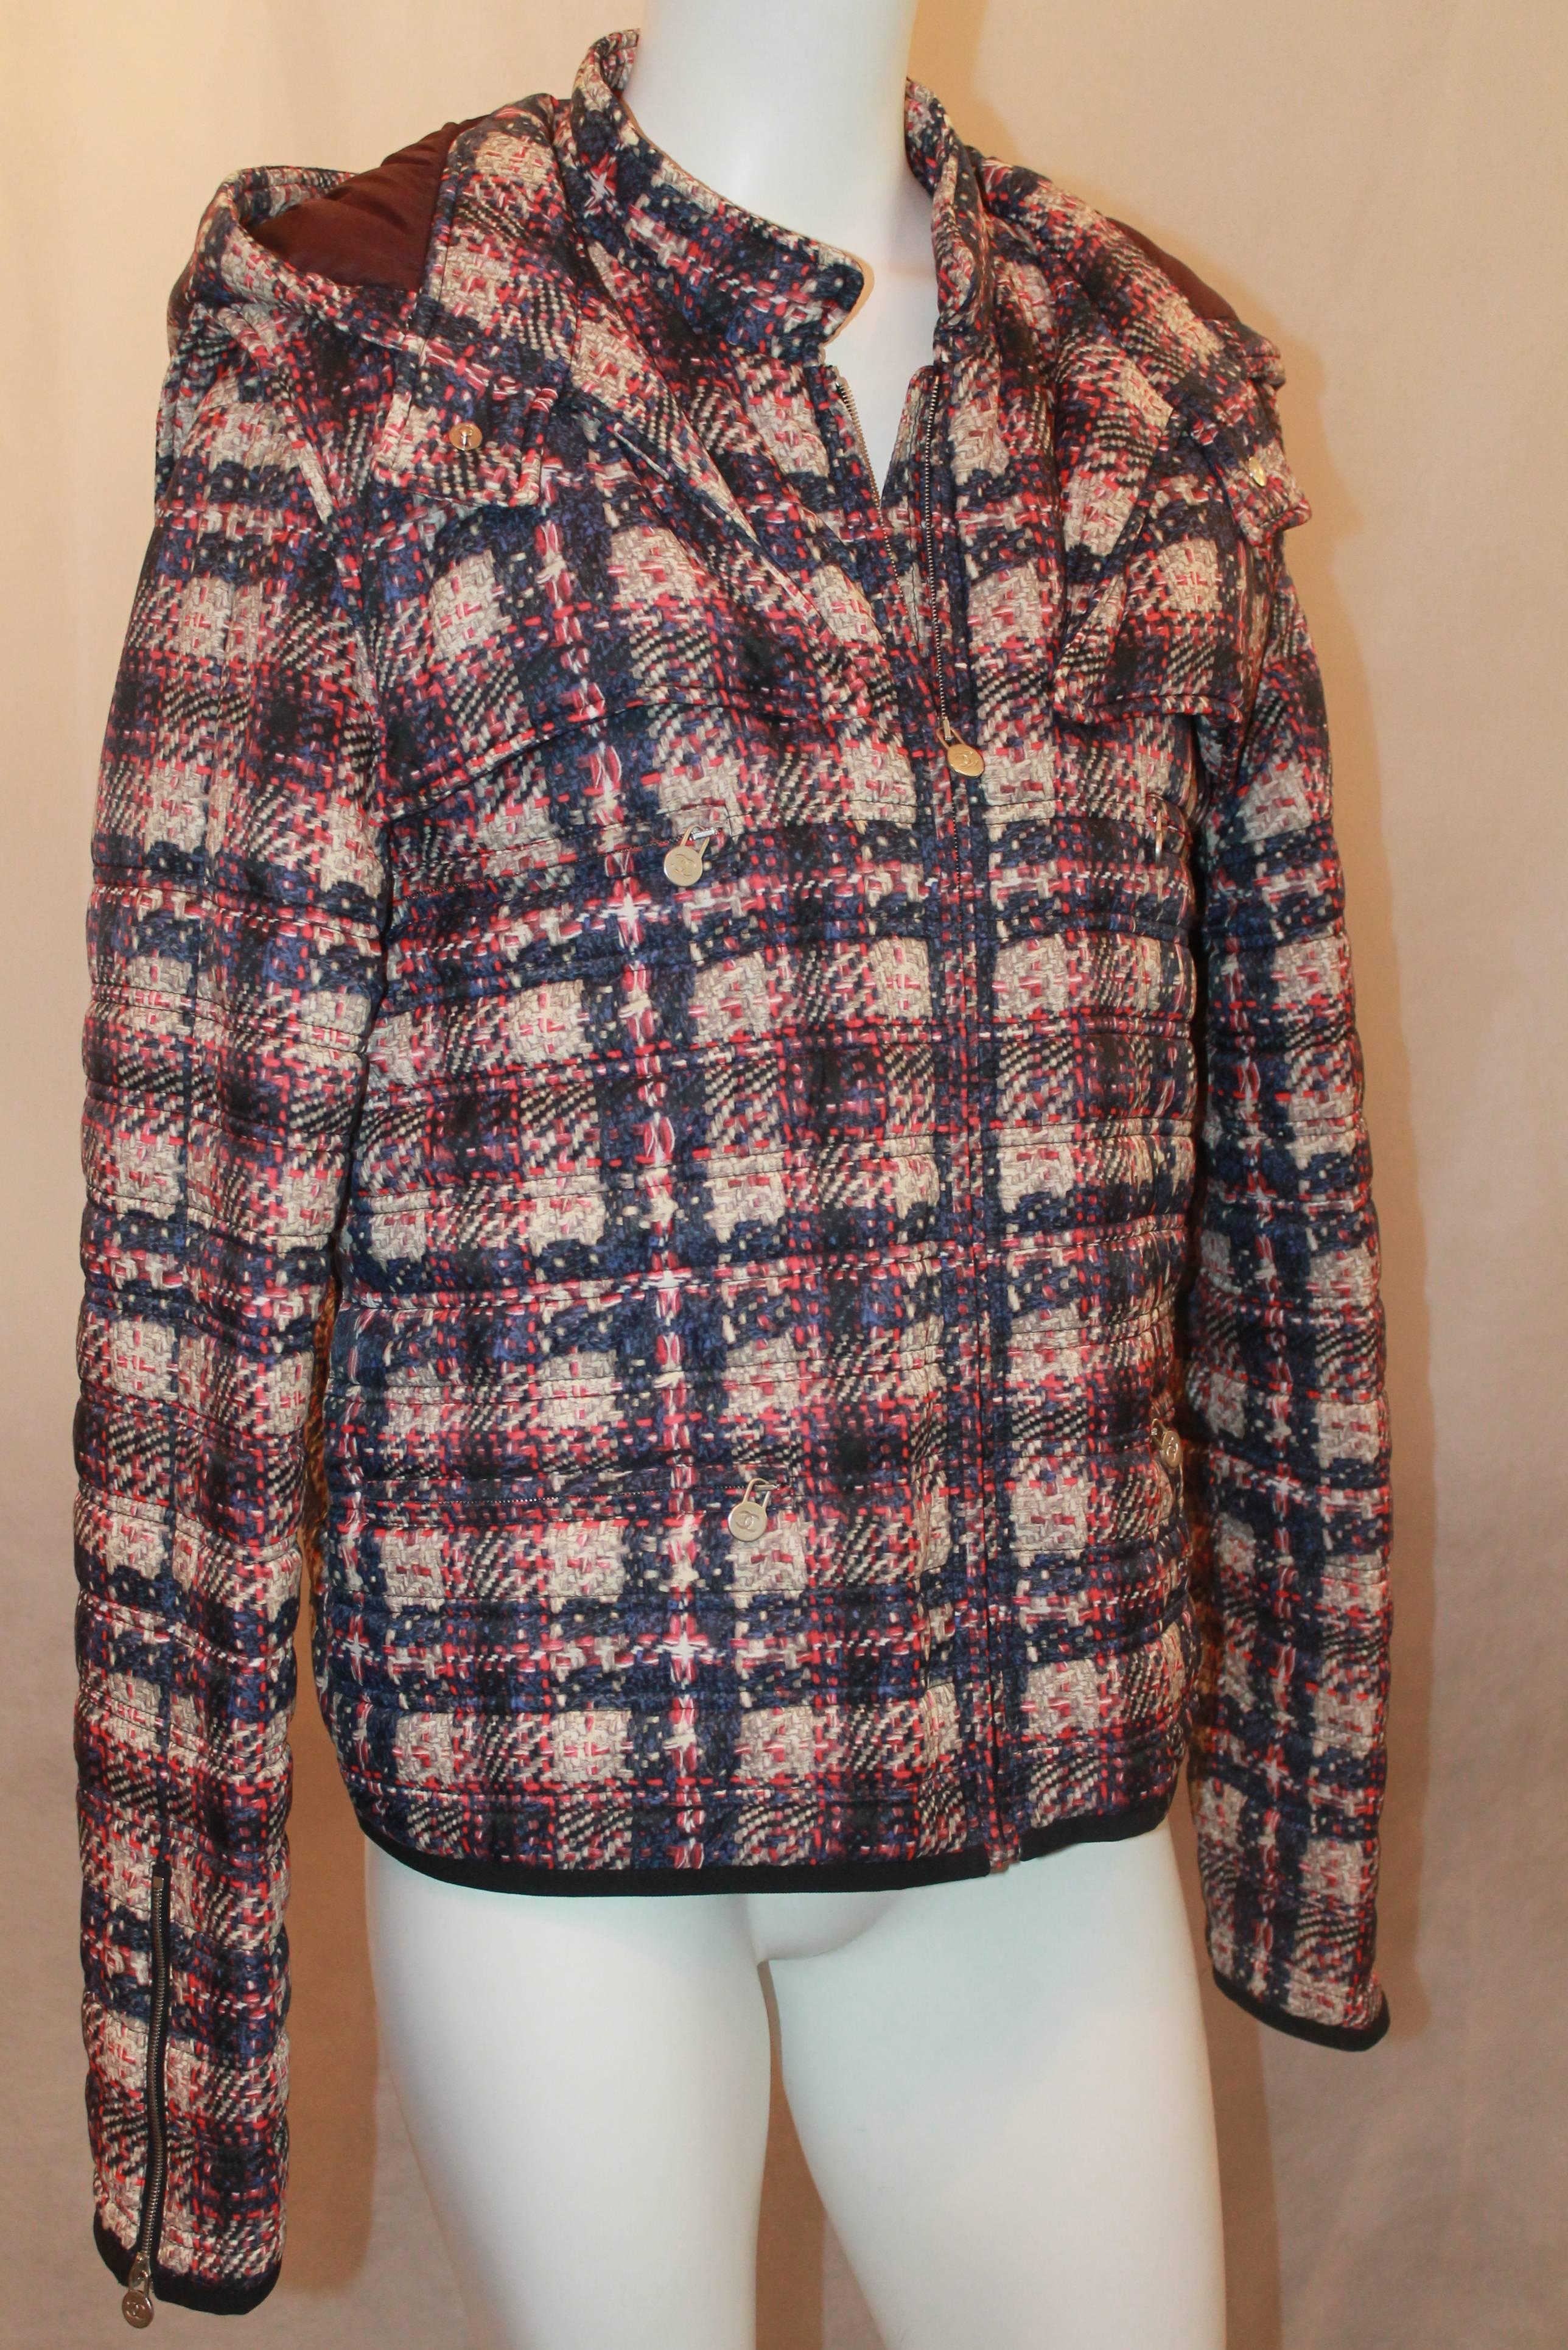 Chanel multi plaid puffer jacket w/ removable hood - Sz 46 - NWT - Circa 2013 The plaid on the jacket is a combination of pink, purples and ivory. It has a detachable hood, front zip and 2 front zipper pockets. Also zips on the ends of the cuff. NWT